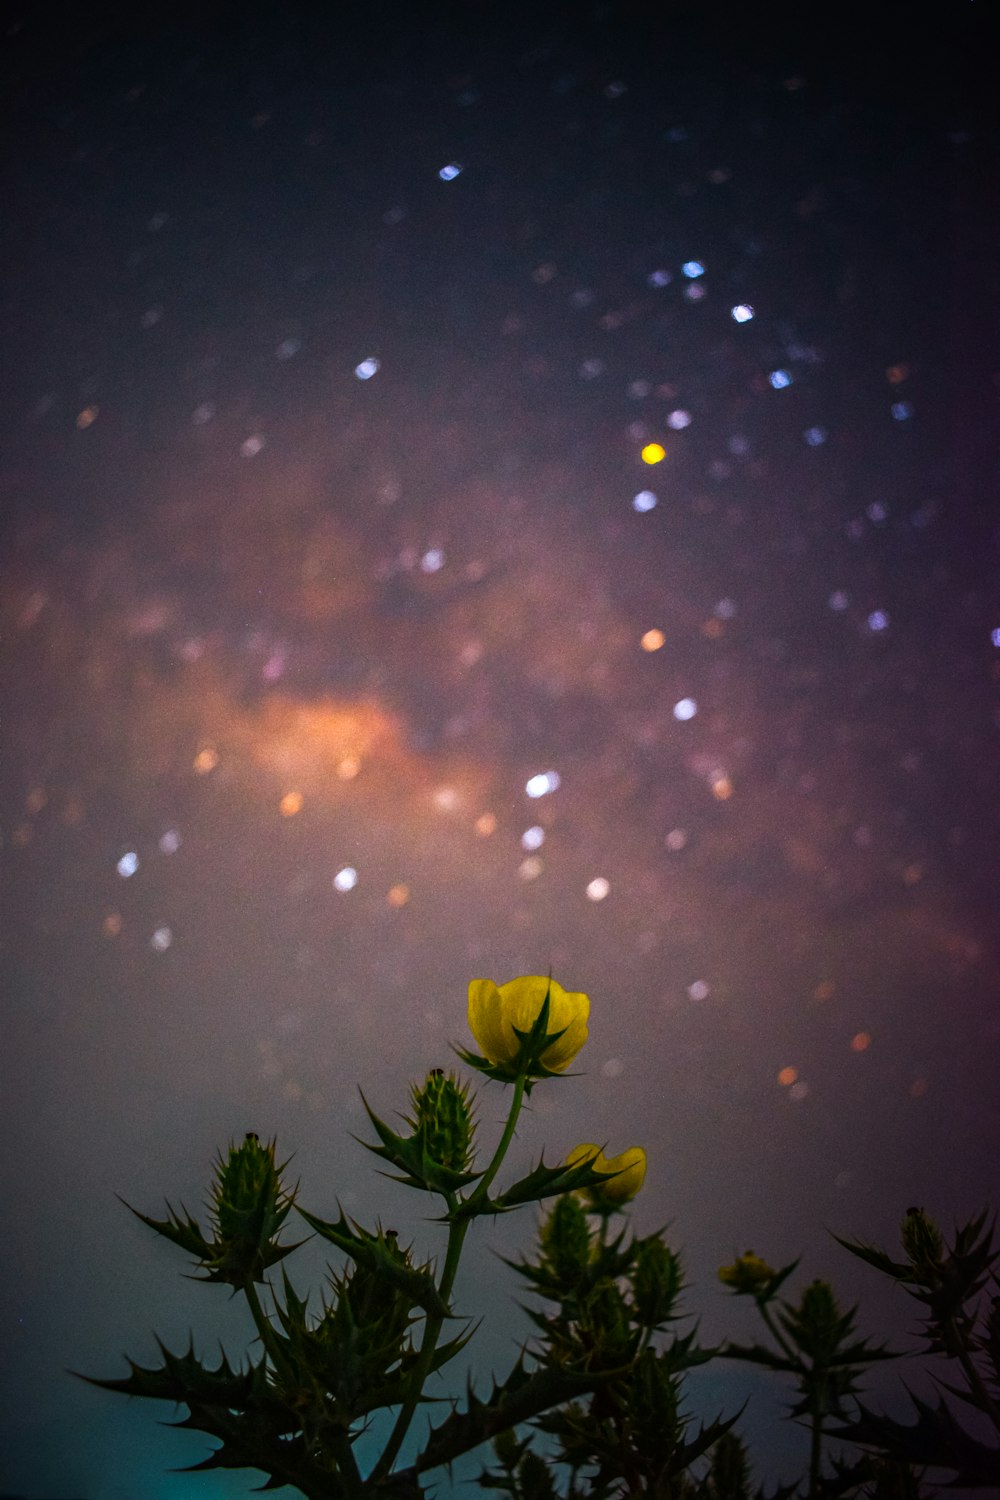 the night sky is filled with stars and a yellow flower